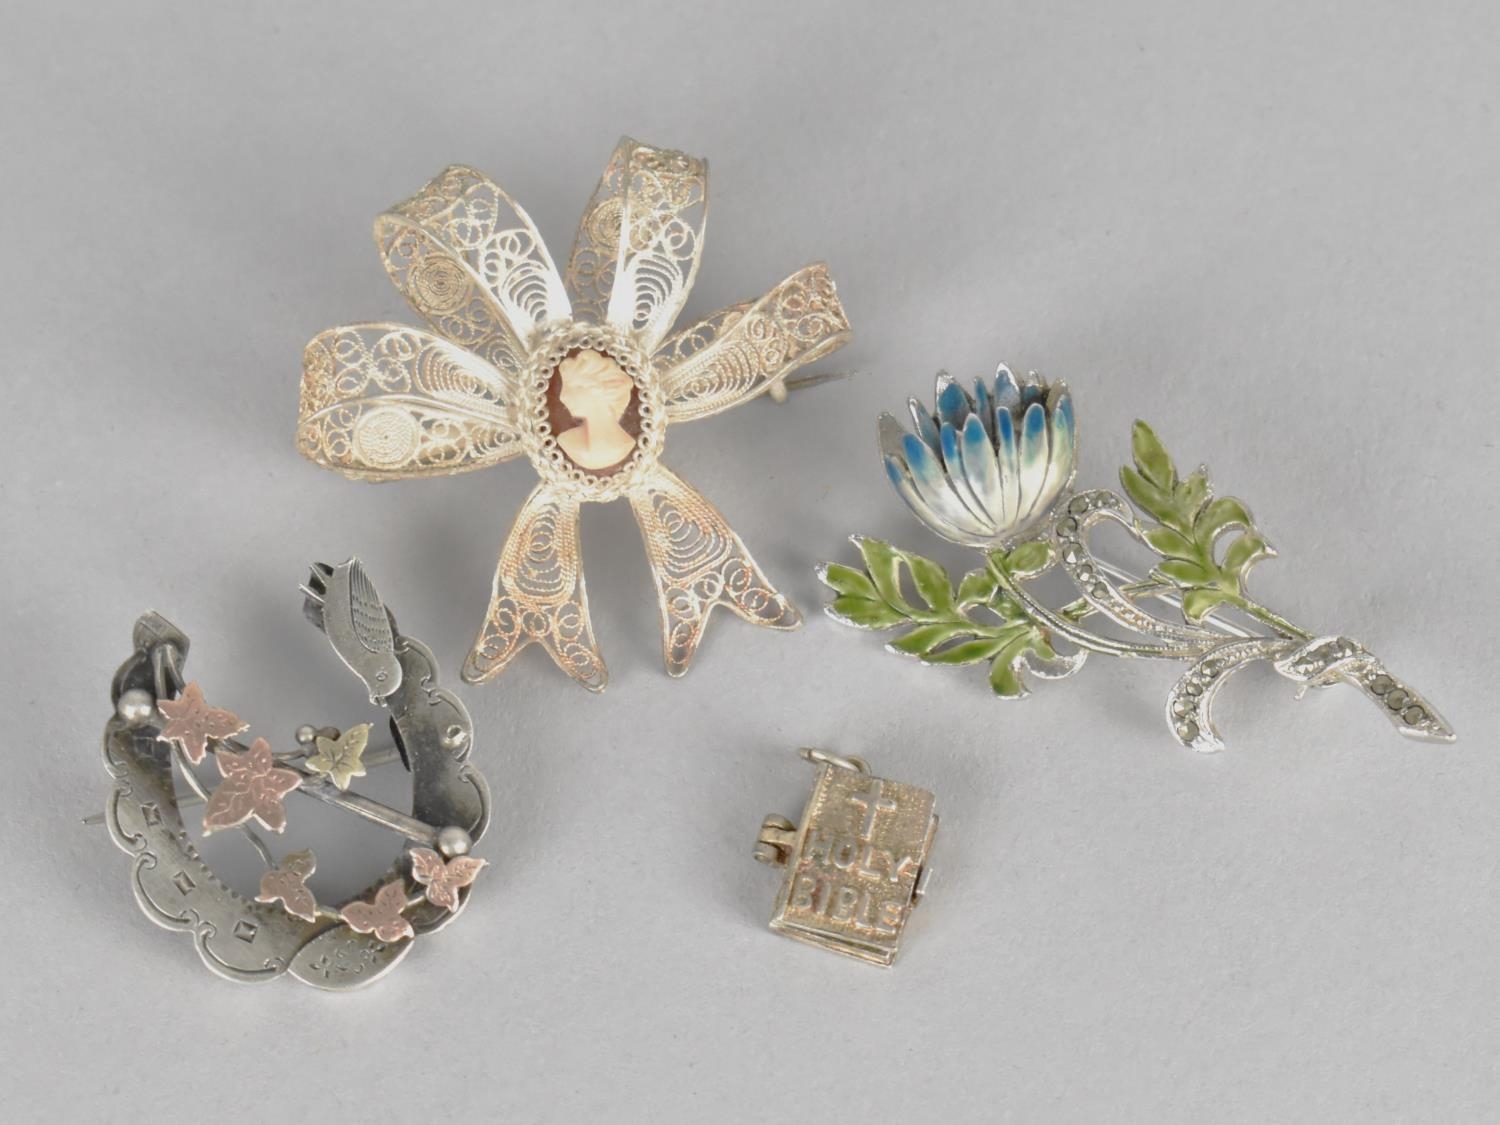 Two Silver Brooches and a Silver Bible Charm Inside Written Lords Prayer and the Ten Comandments,